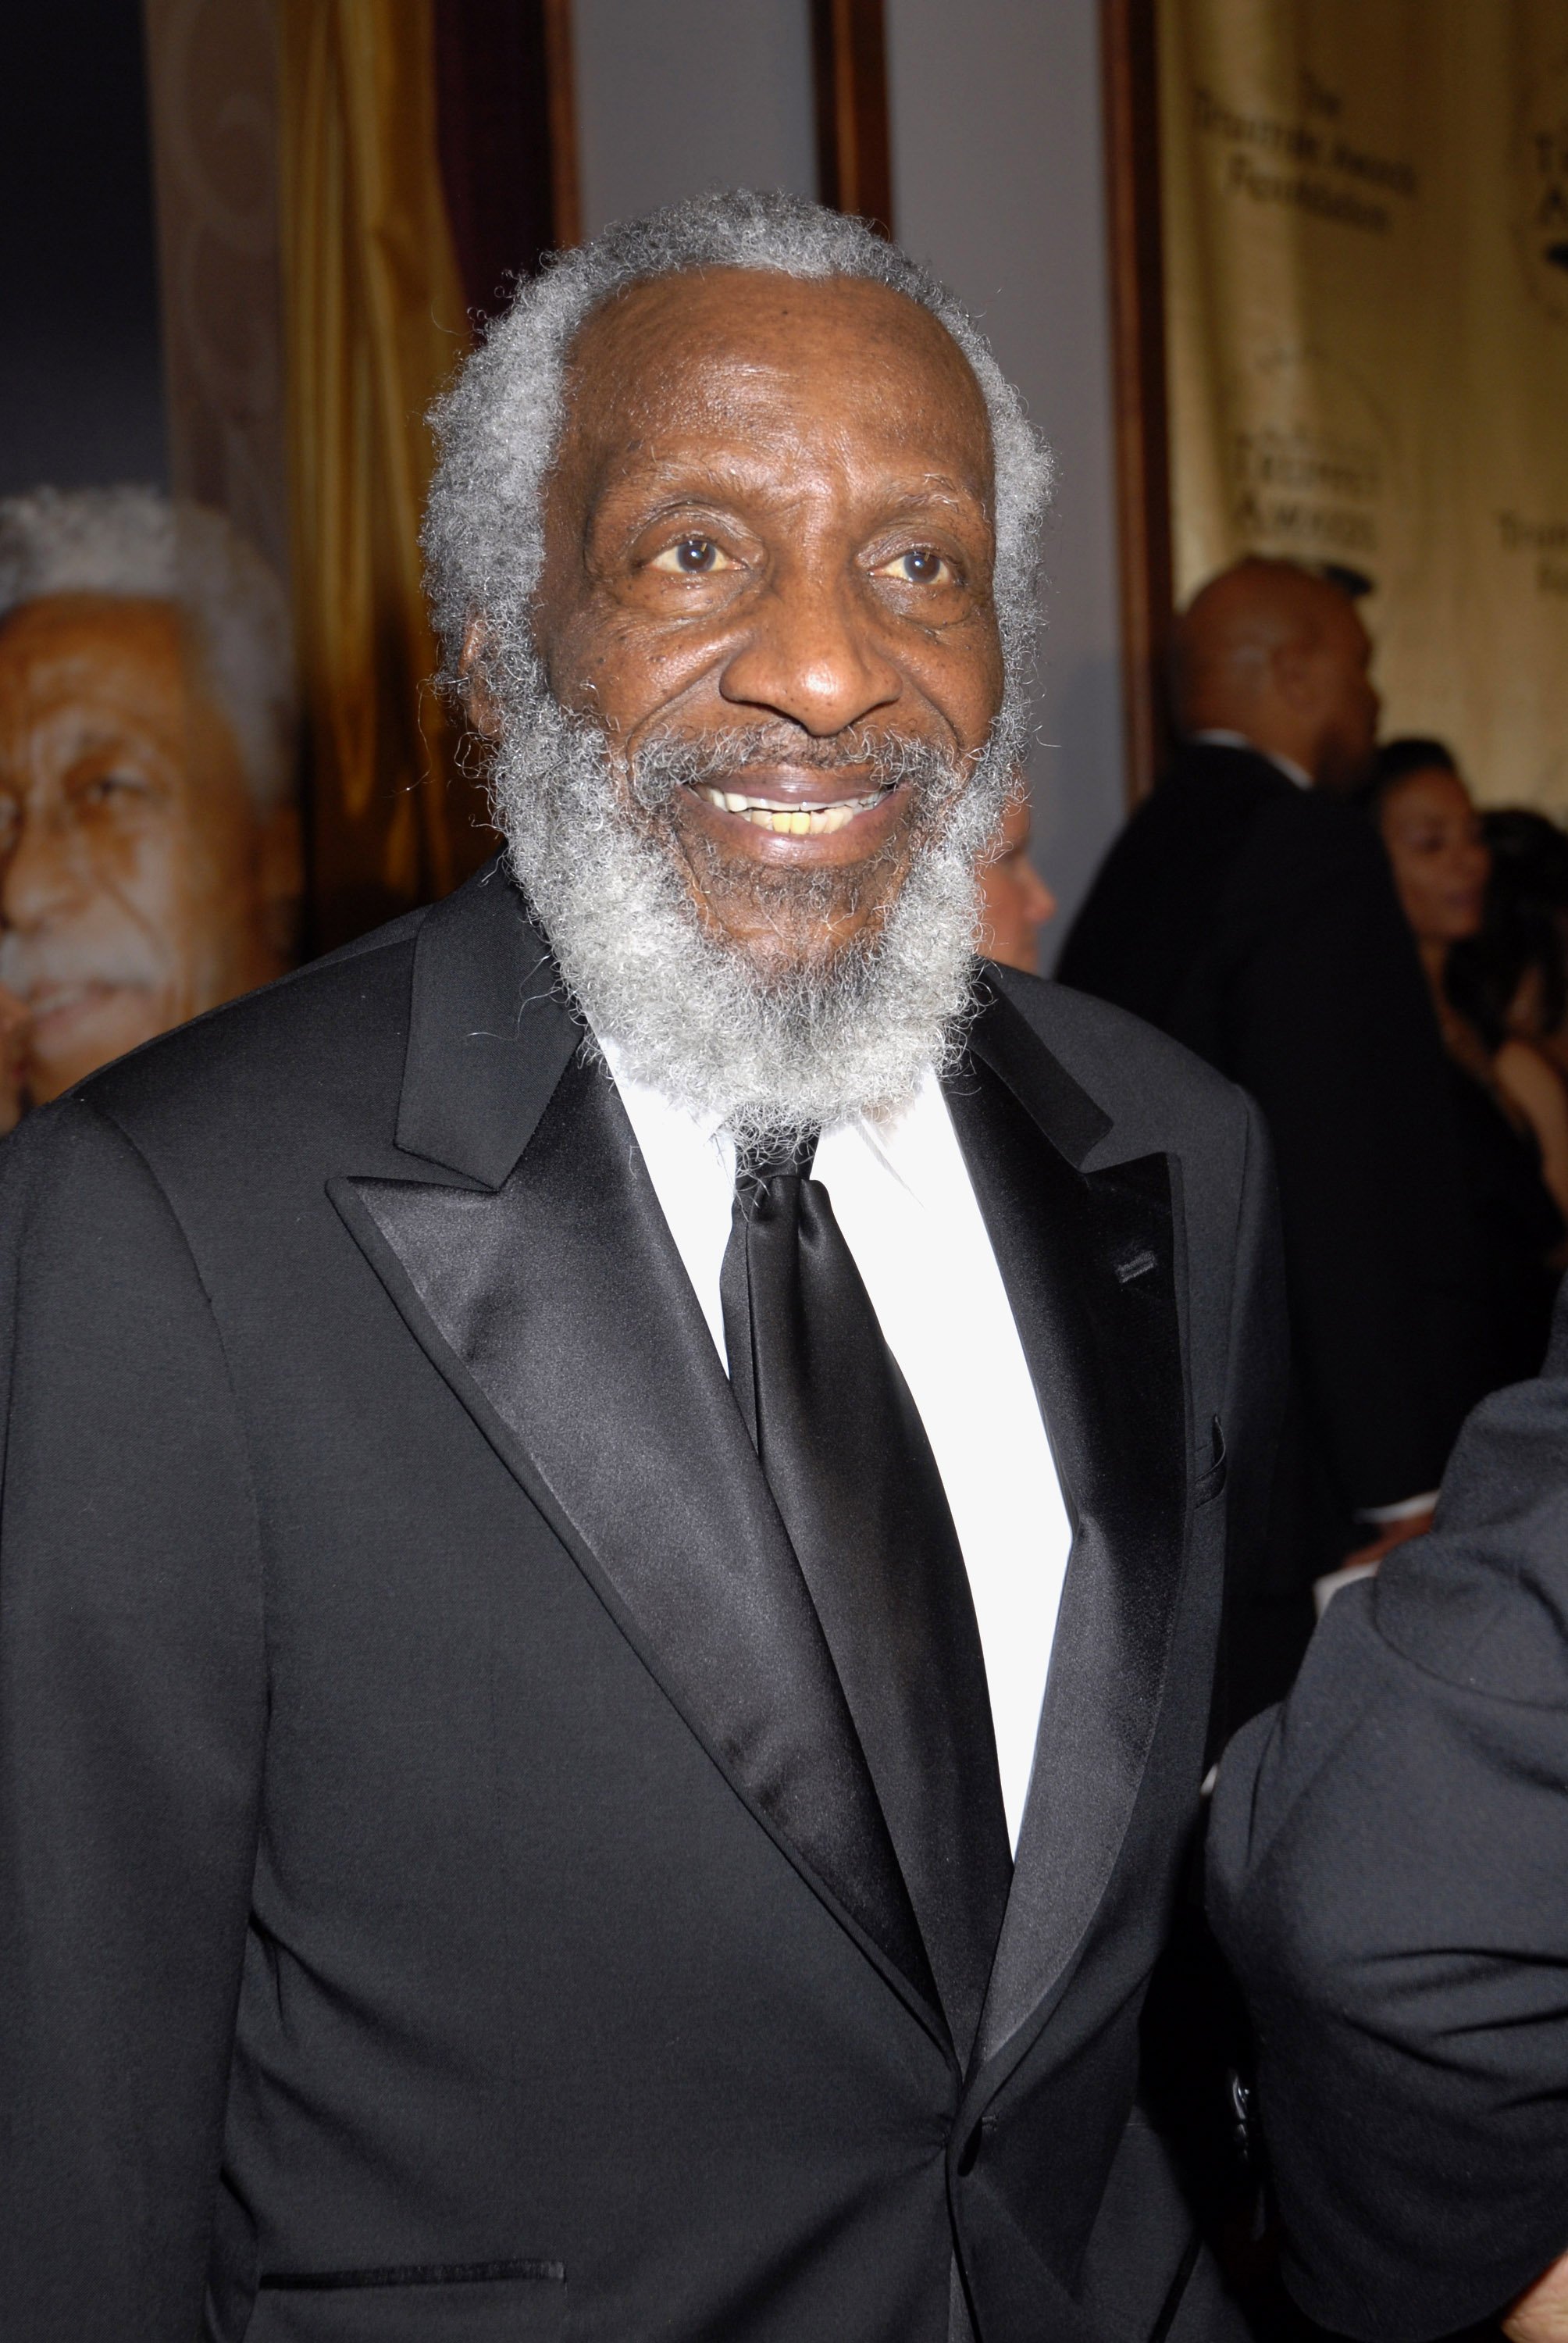 Dick Gregory during 2007 Trumpet Awards Celebrate African American Achievement at Bellagio Hotel in Las Vegas, Nevada, United States on 22 January 2007. | Photo: Getty Images